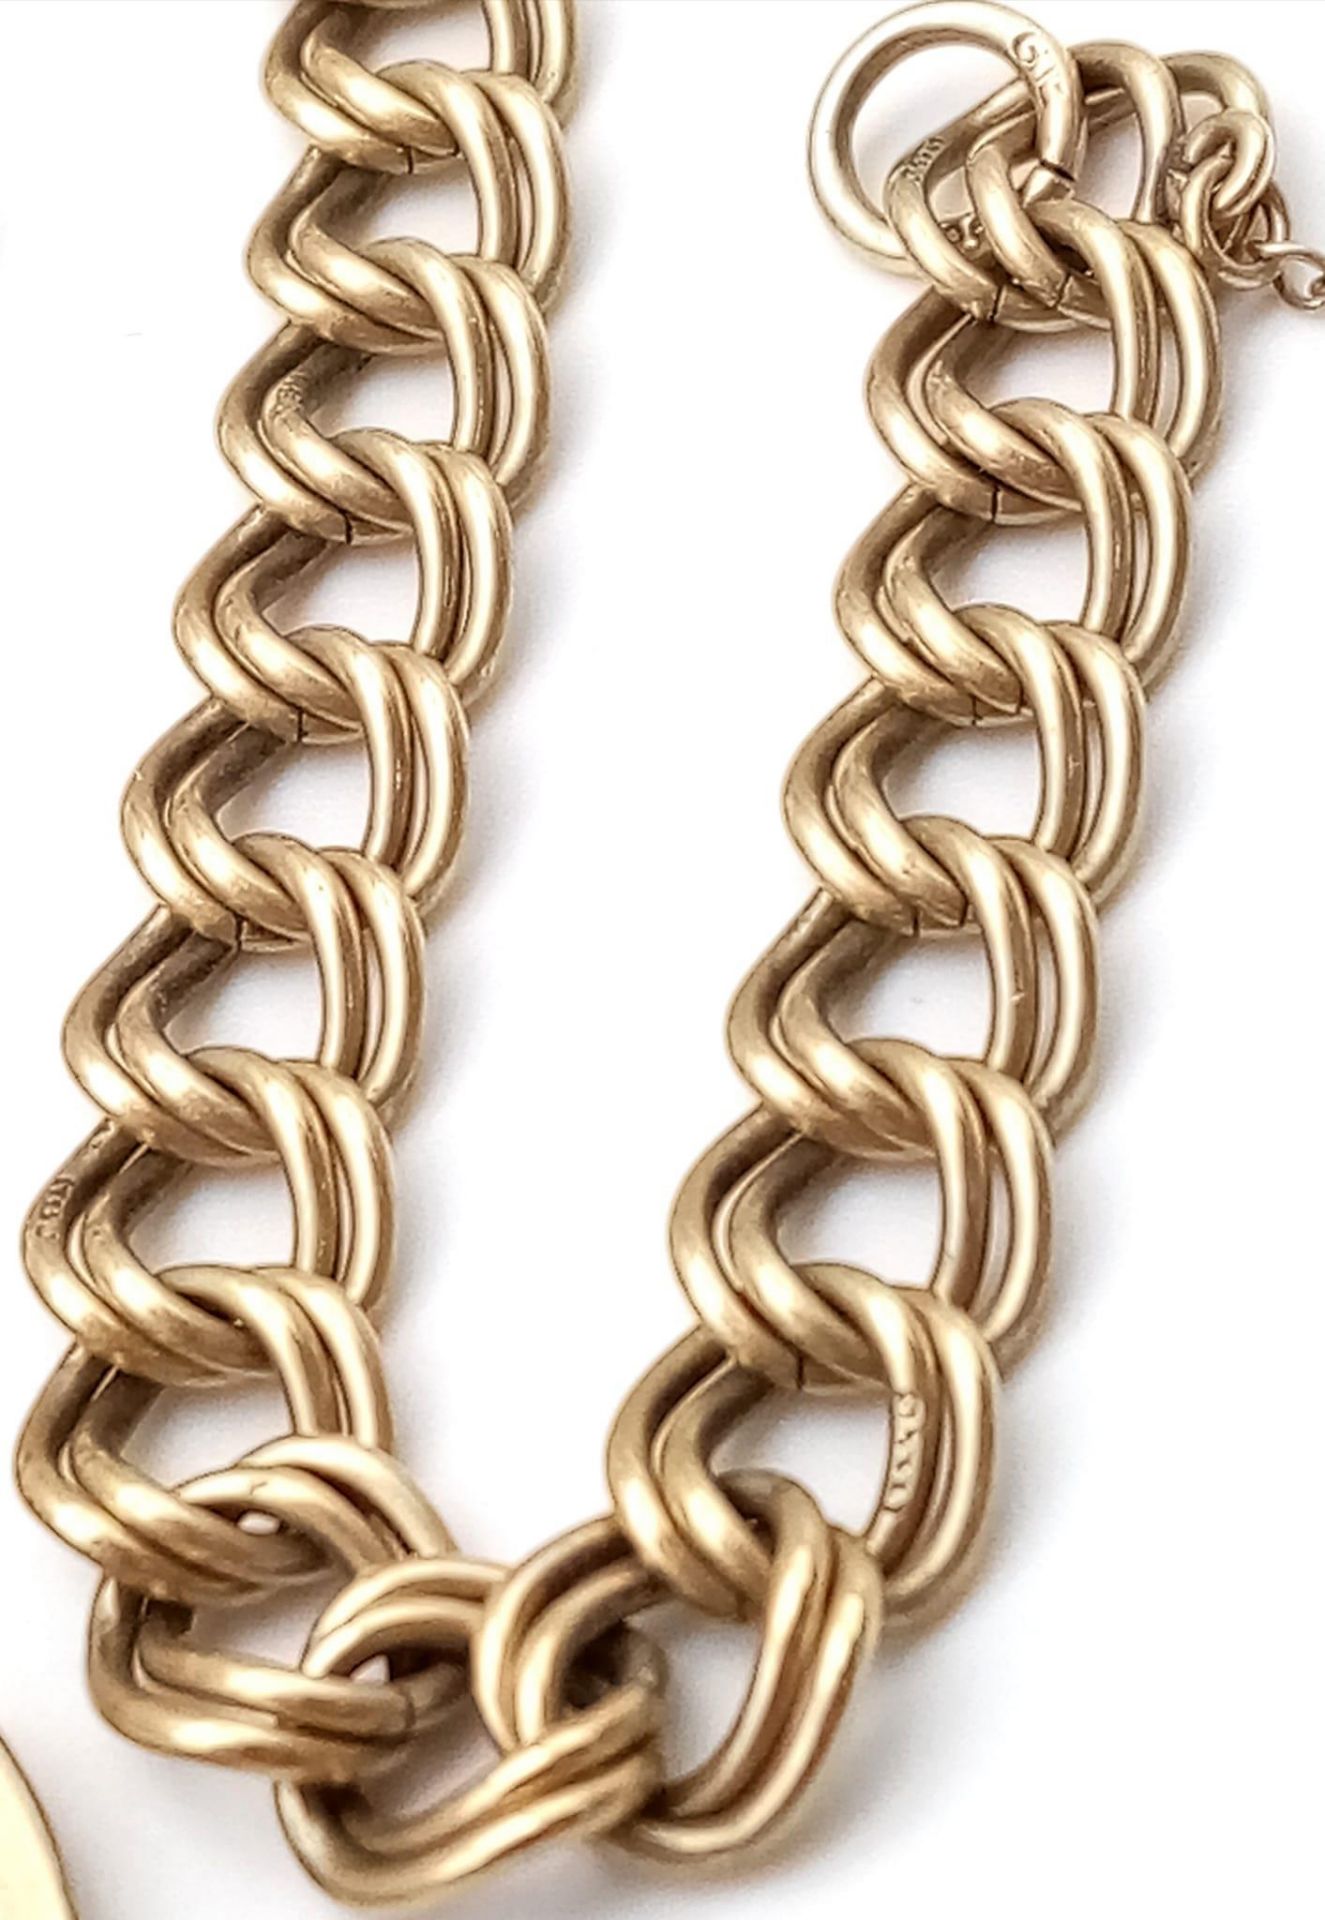 A Vintage 9K Yellow Gold Double Curb Link Bracelet with Heart Clasp. 17cm. 13.54g weight. - Image 3 of 6